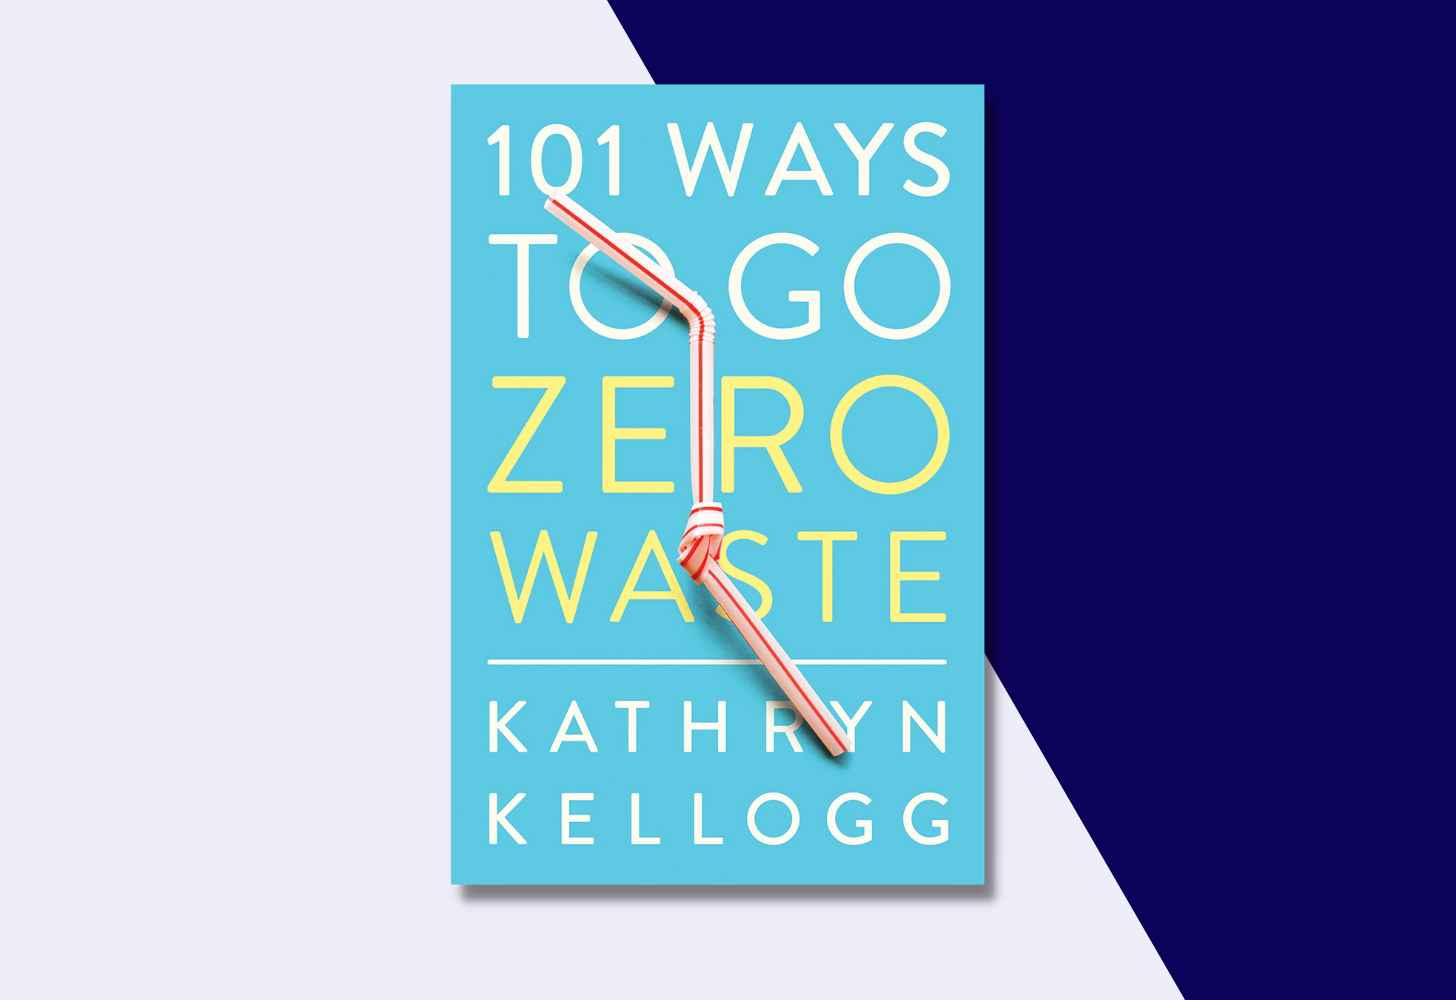 The Cover Of “101 Ways to Go Zero Waste” by Kathryn Kellogg